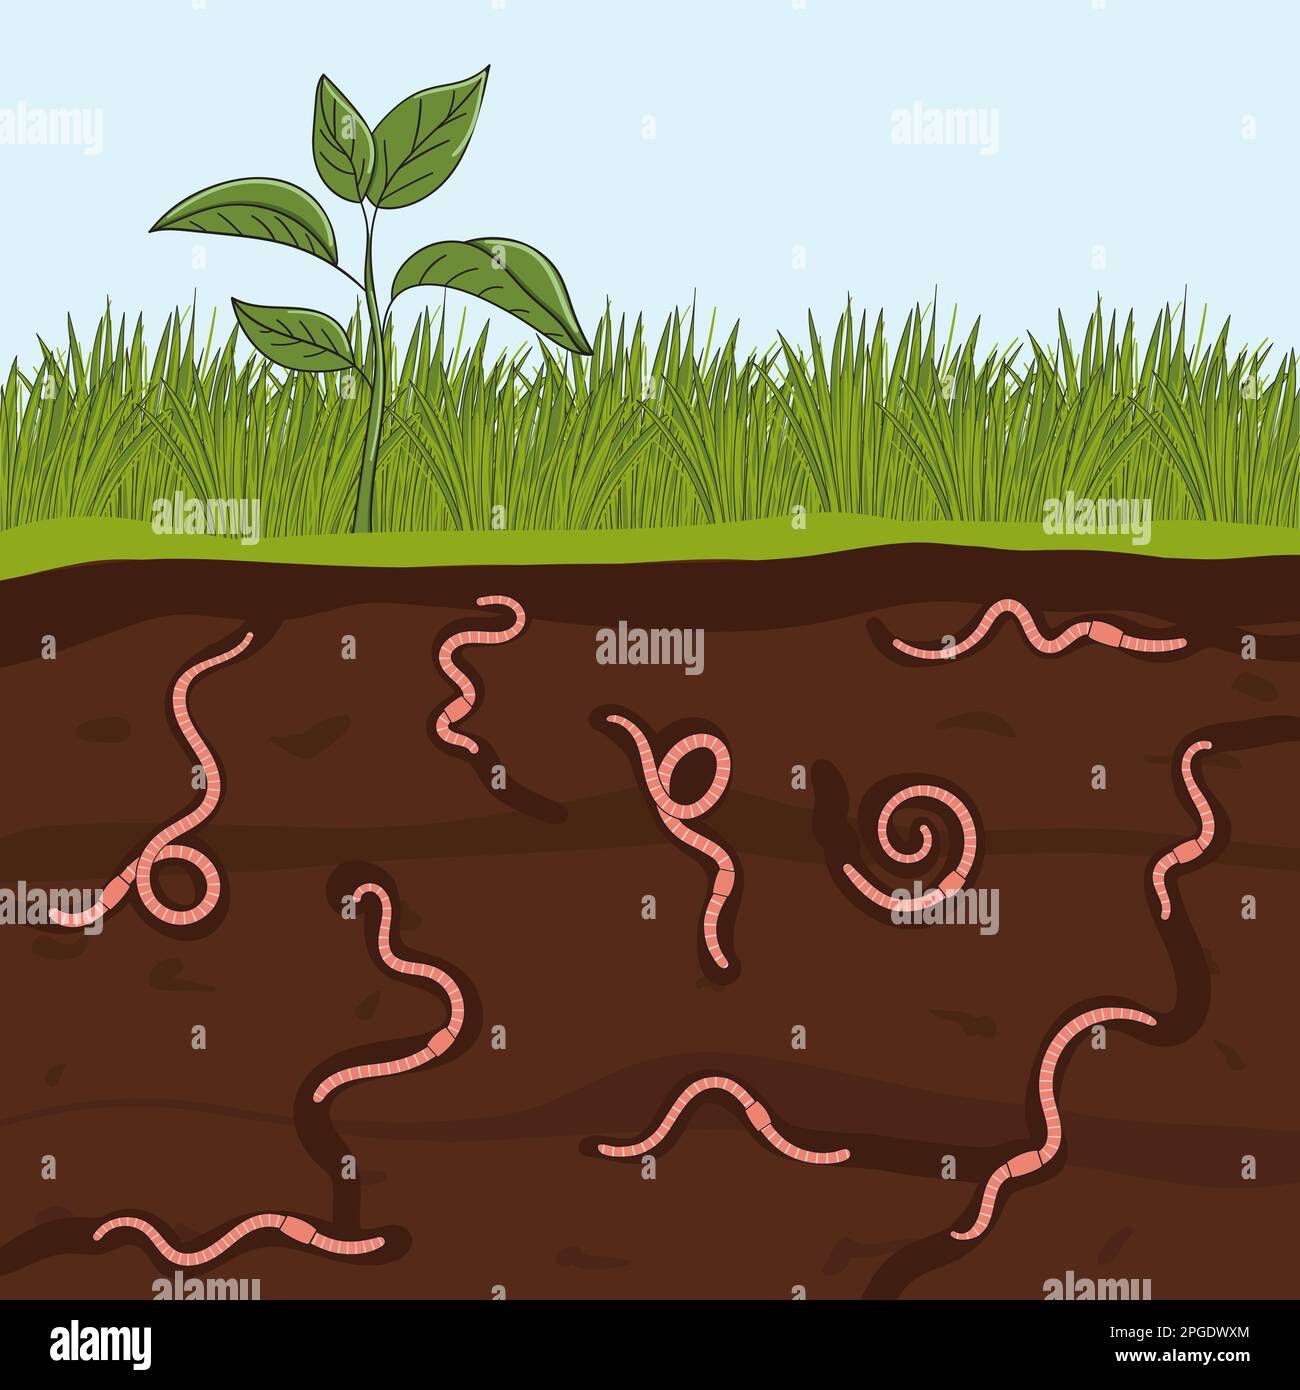 Pink earthworms in garden soil. Ground cutaway with worms. Farming and agriculture. Hand drawn vector illustration. Stock Vector